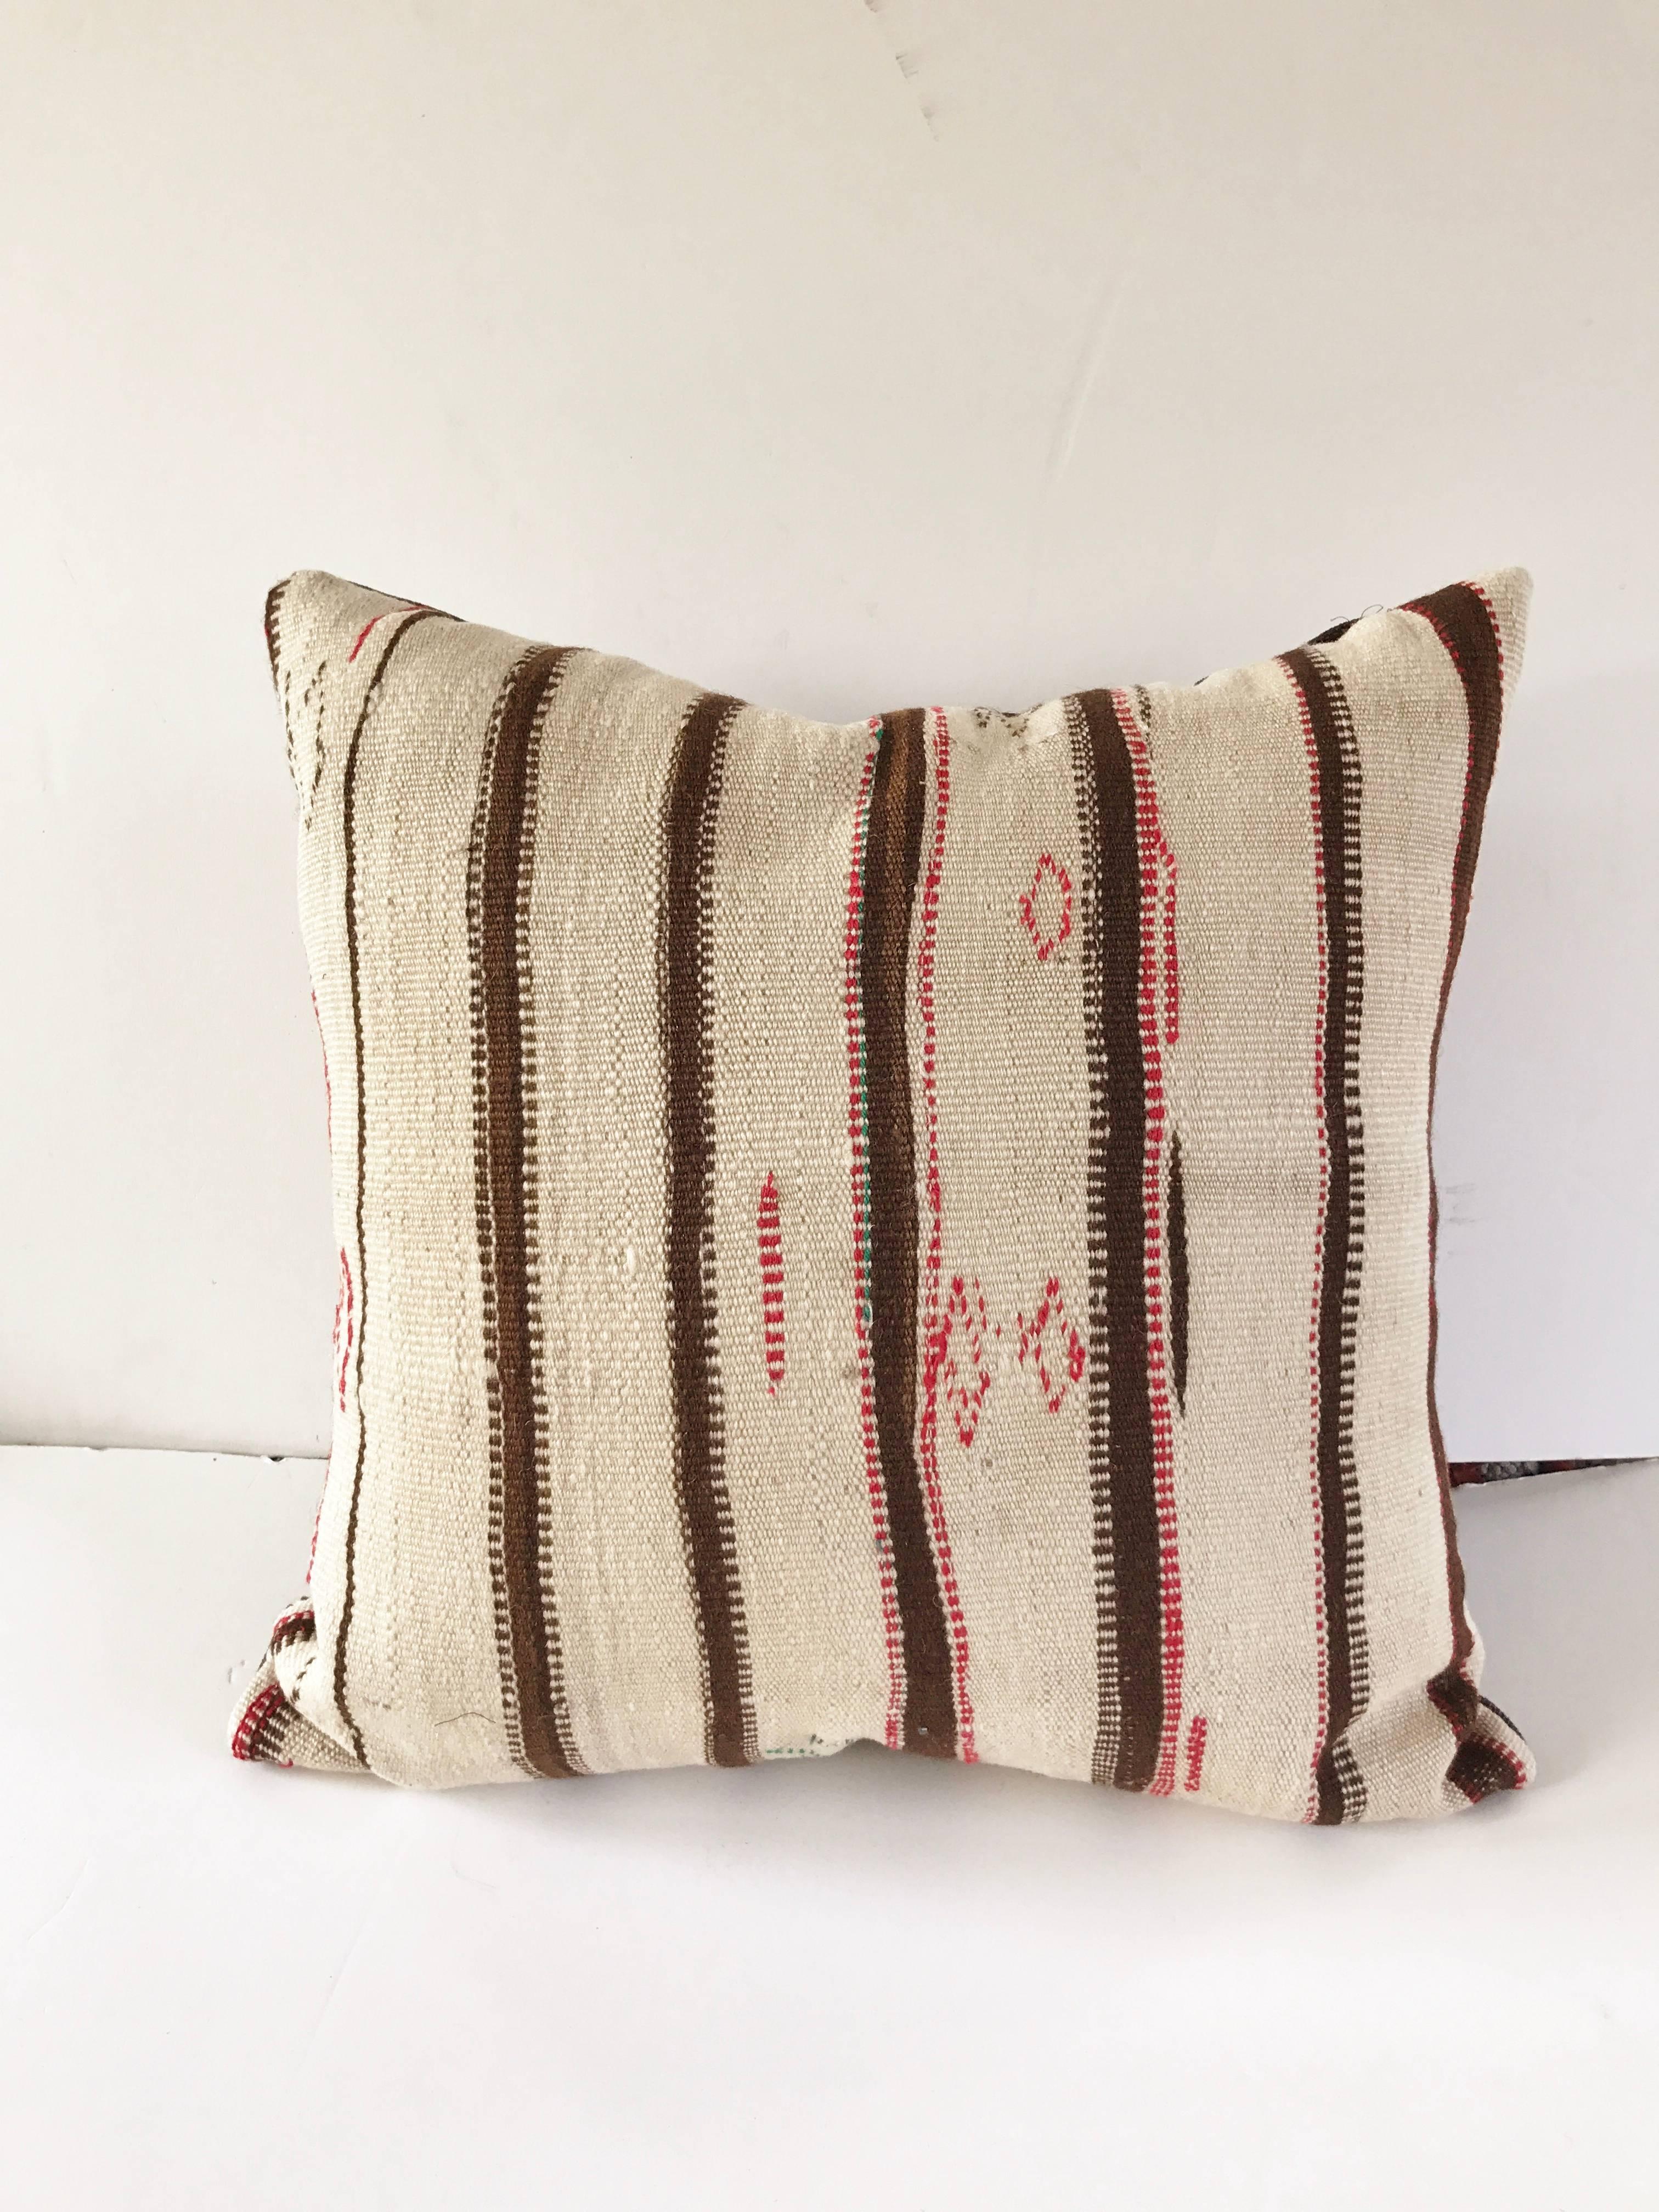 Custom pillow cut from a vintage hand-loomed wool Moroccan Berber rug from the Atlas Mountains. Wool is soft and lustrous with good natural color. Pillow is backed in a dark brown linen blend, filled with an insert of 50/50 down and feathers and